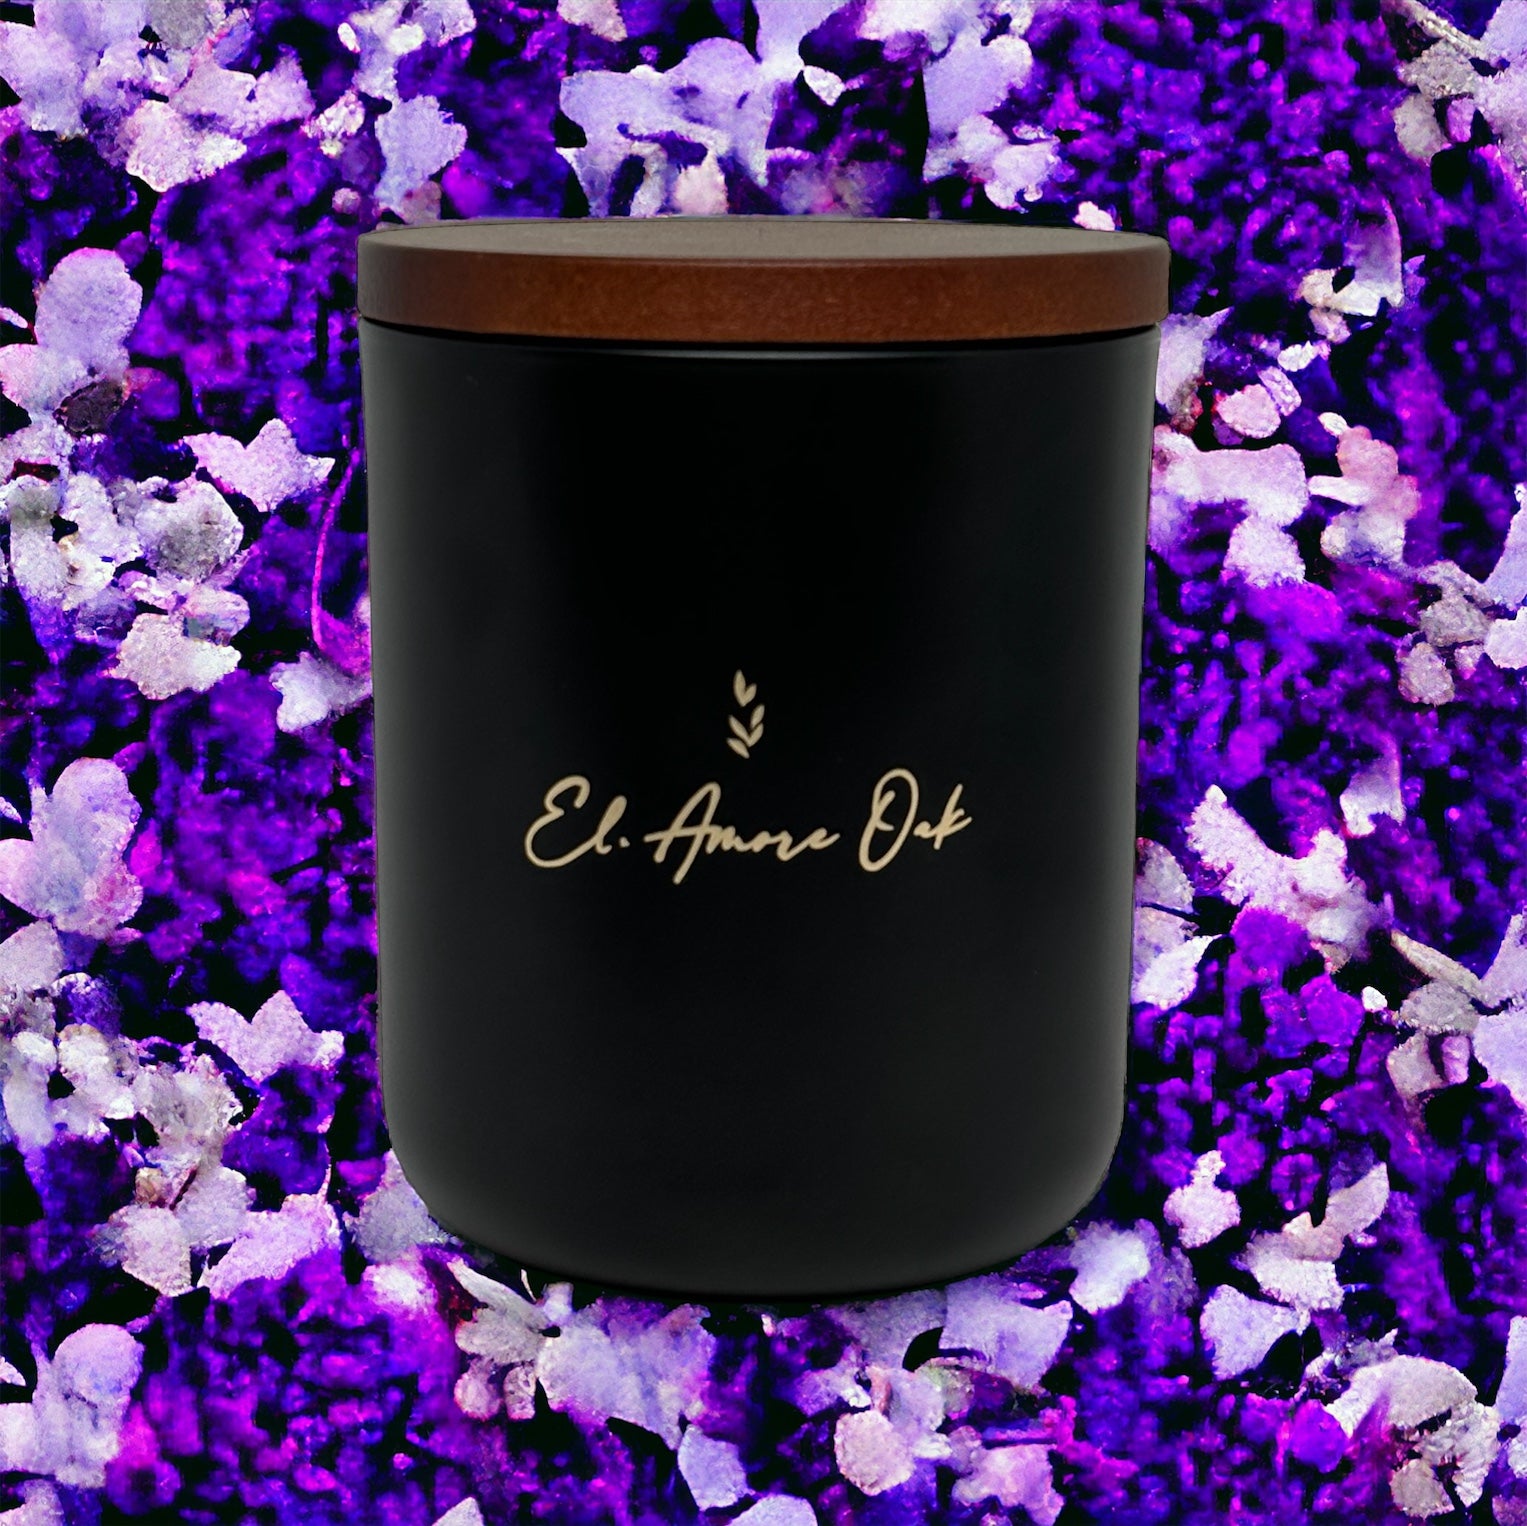 Tranquillity - Lavender & Ylang Ylang Wooden Wick Candle